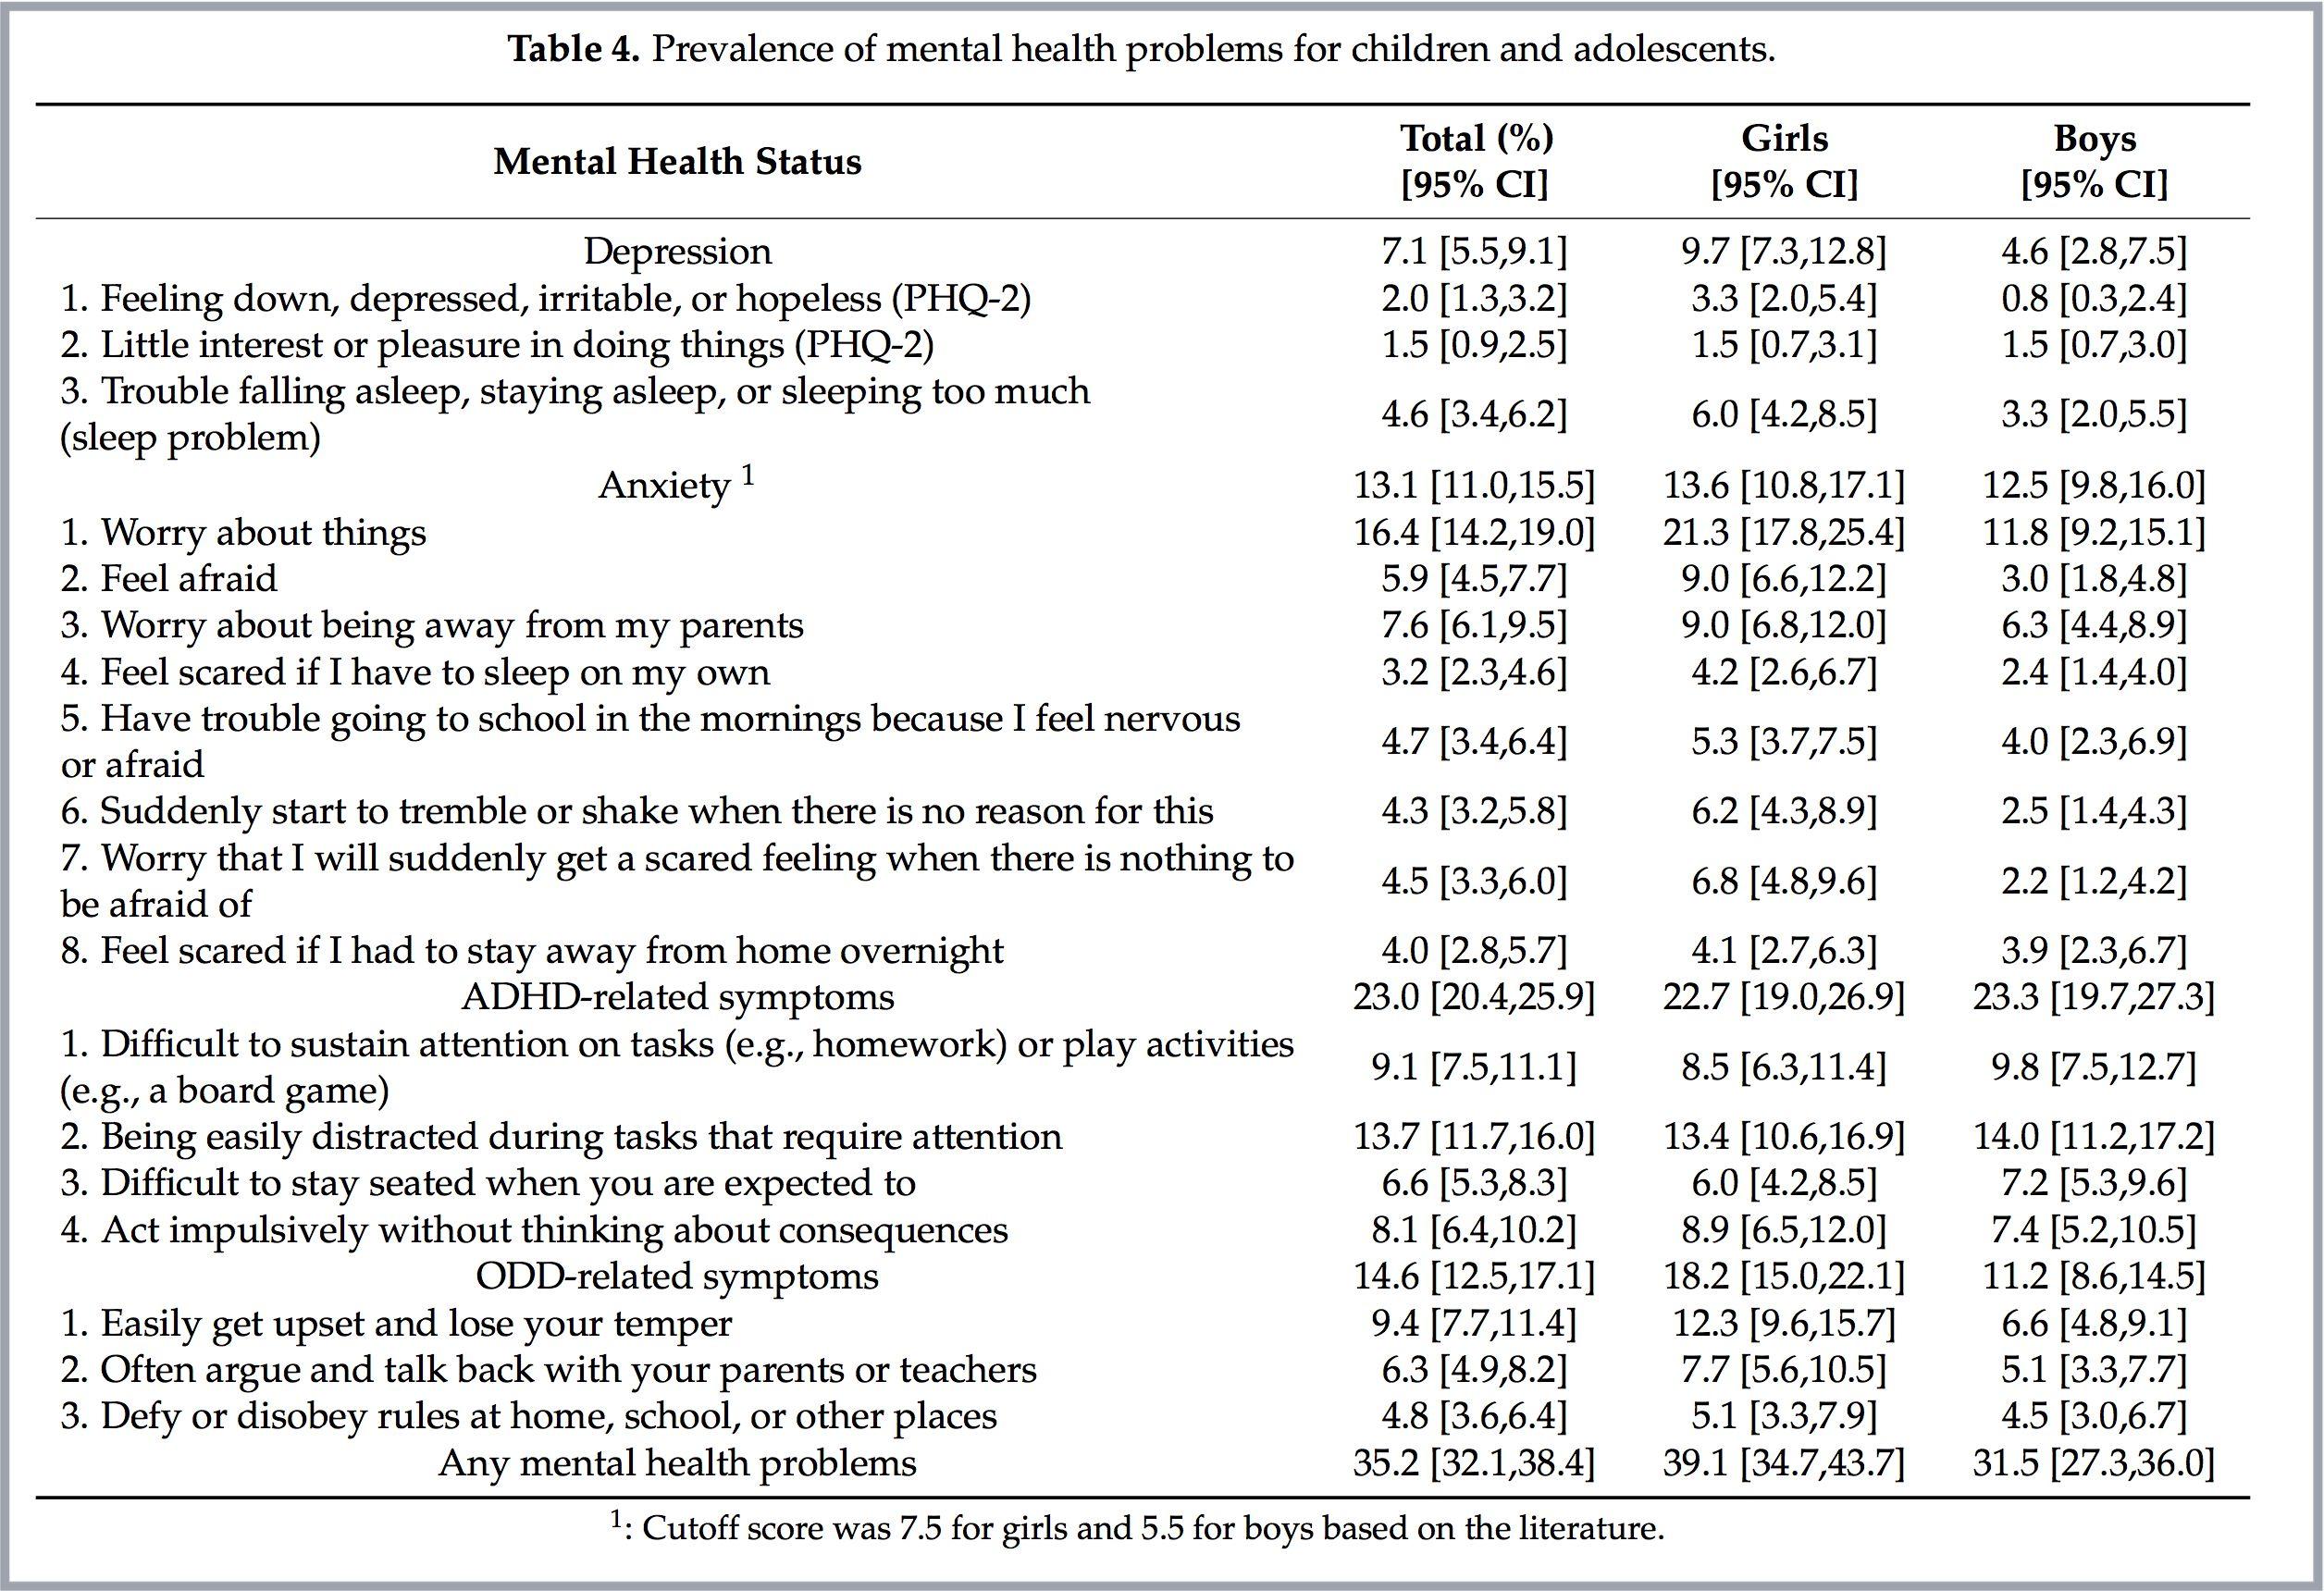 Source : "Stress and Mental Health Problems During First COVID-19 Lockdown", Université de Zurich, 3 mai 2021.